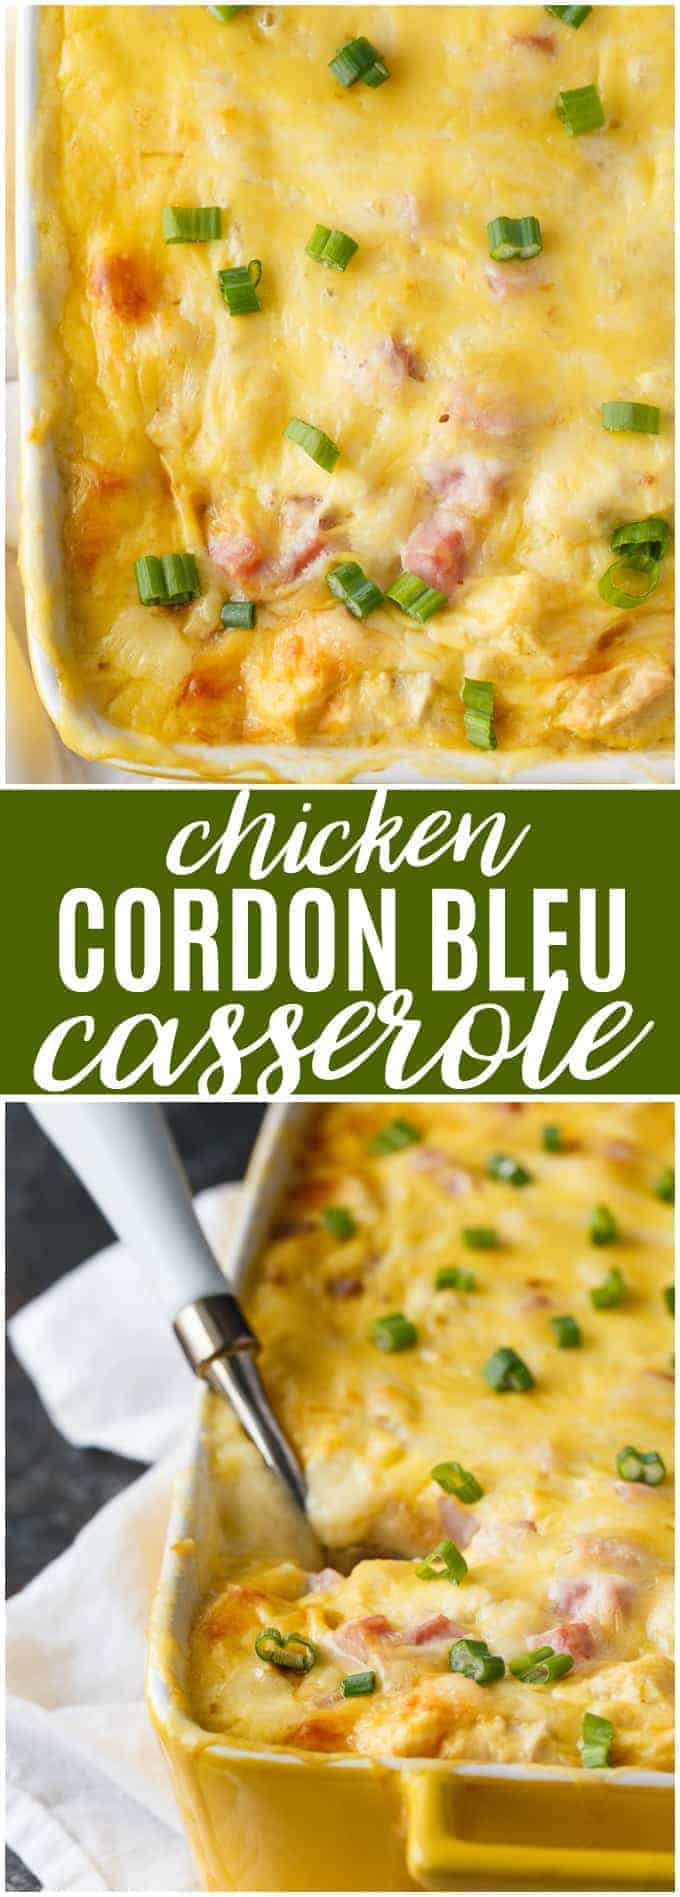 Chicken Cordon Bleu Casserole - This recipe brings all the classic flavours of Chicken Cordon Bleu without the fuss! It's the perfect way to use leftover chicken, and when paired with Swiss cheese and bread, it is a comforting, easy and delicious meal.